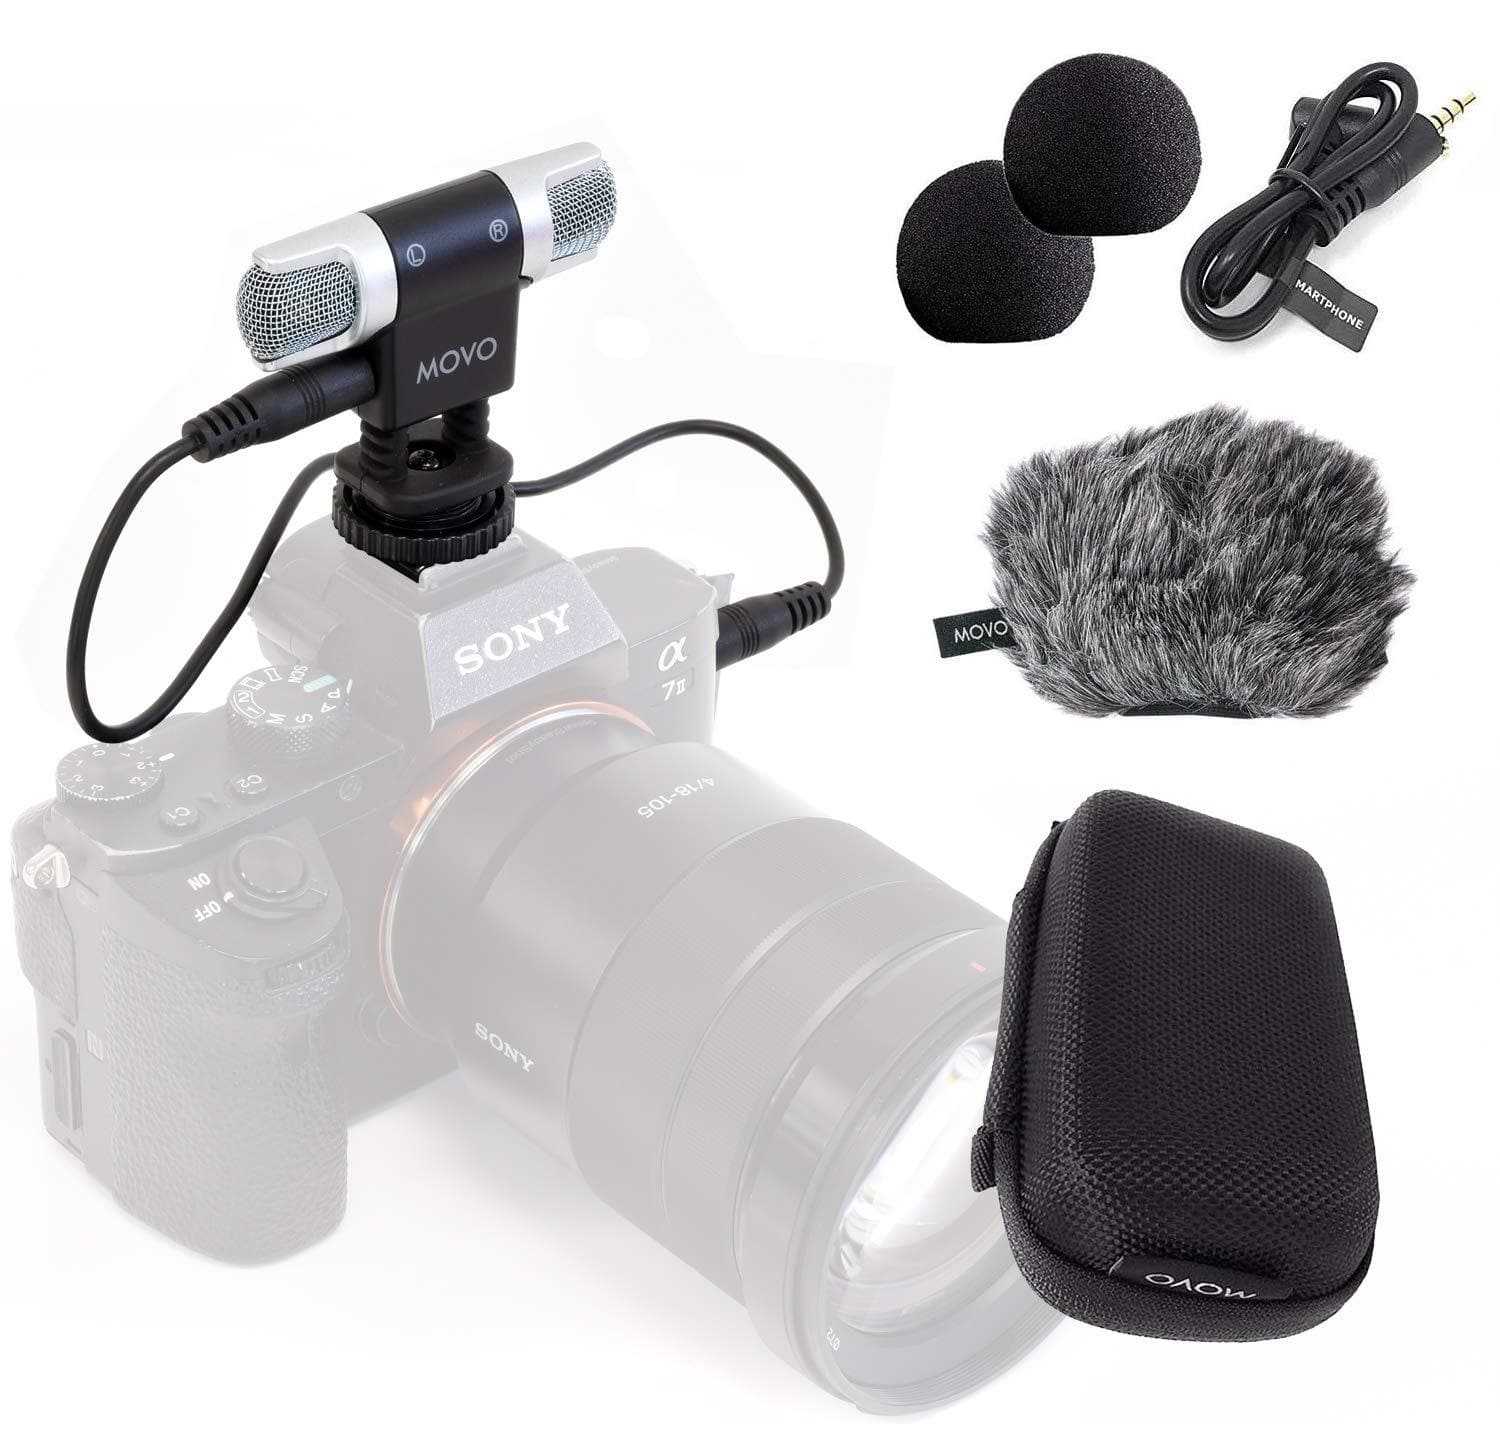 VXR3000 | Compact Stereo Microphone Kit | Movo